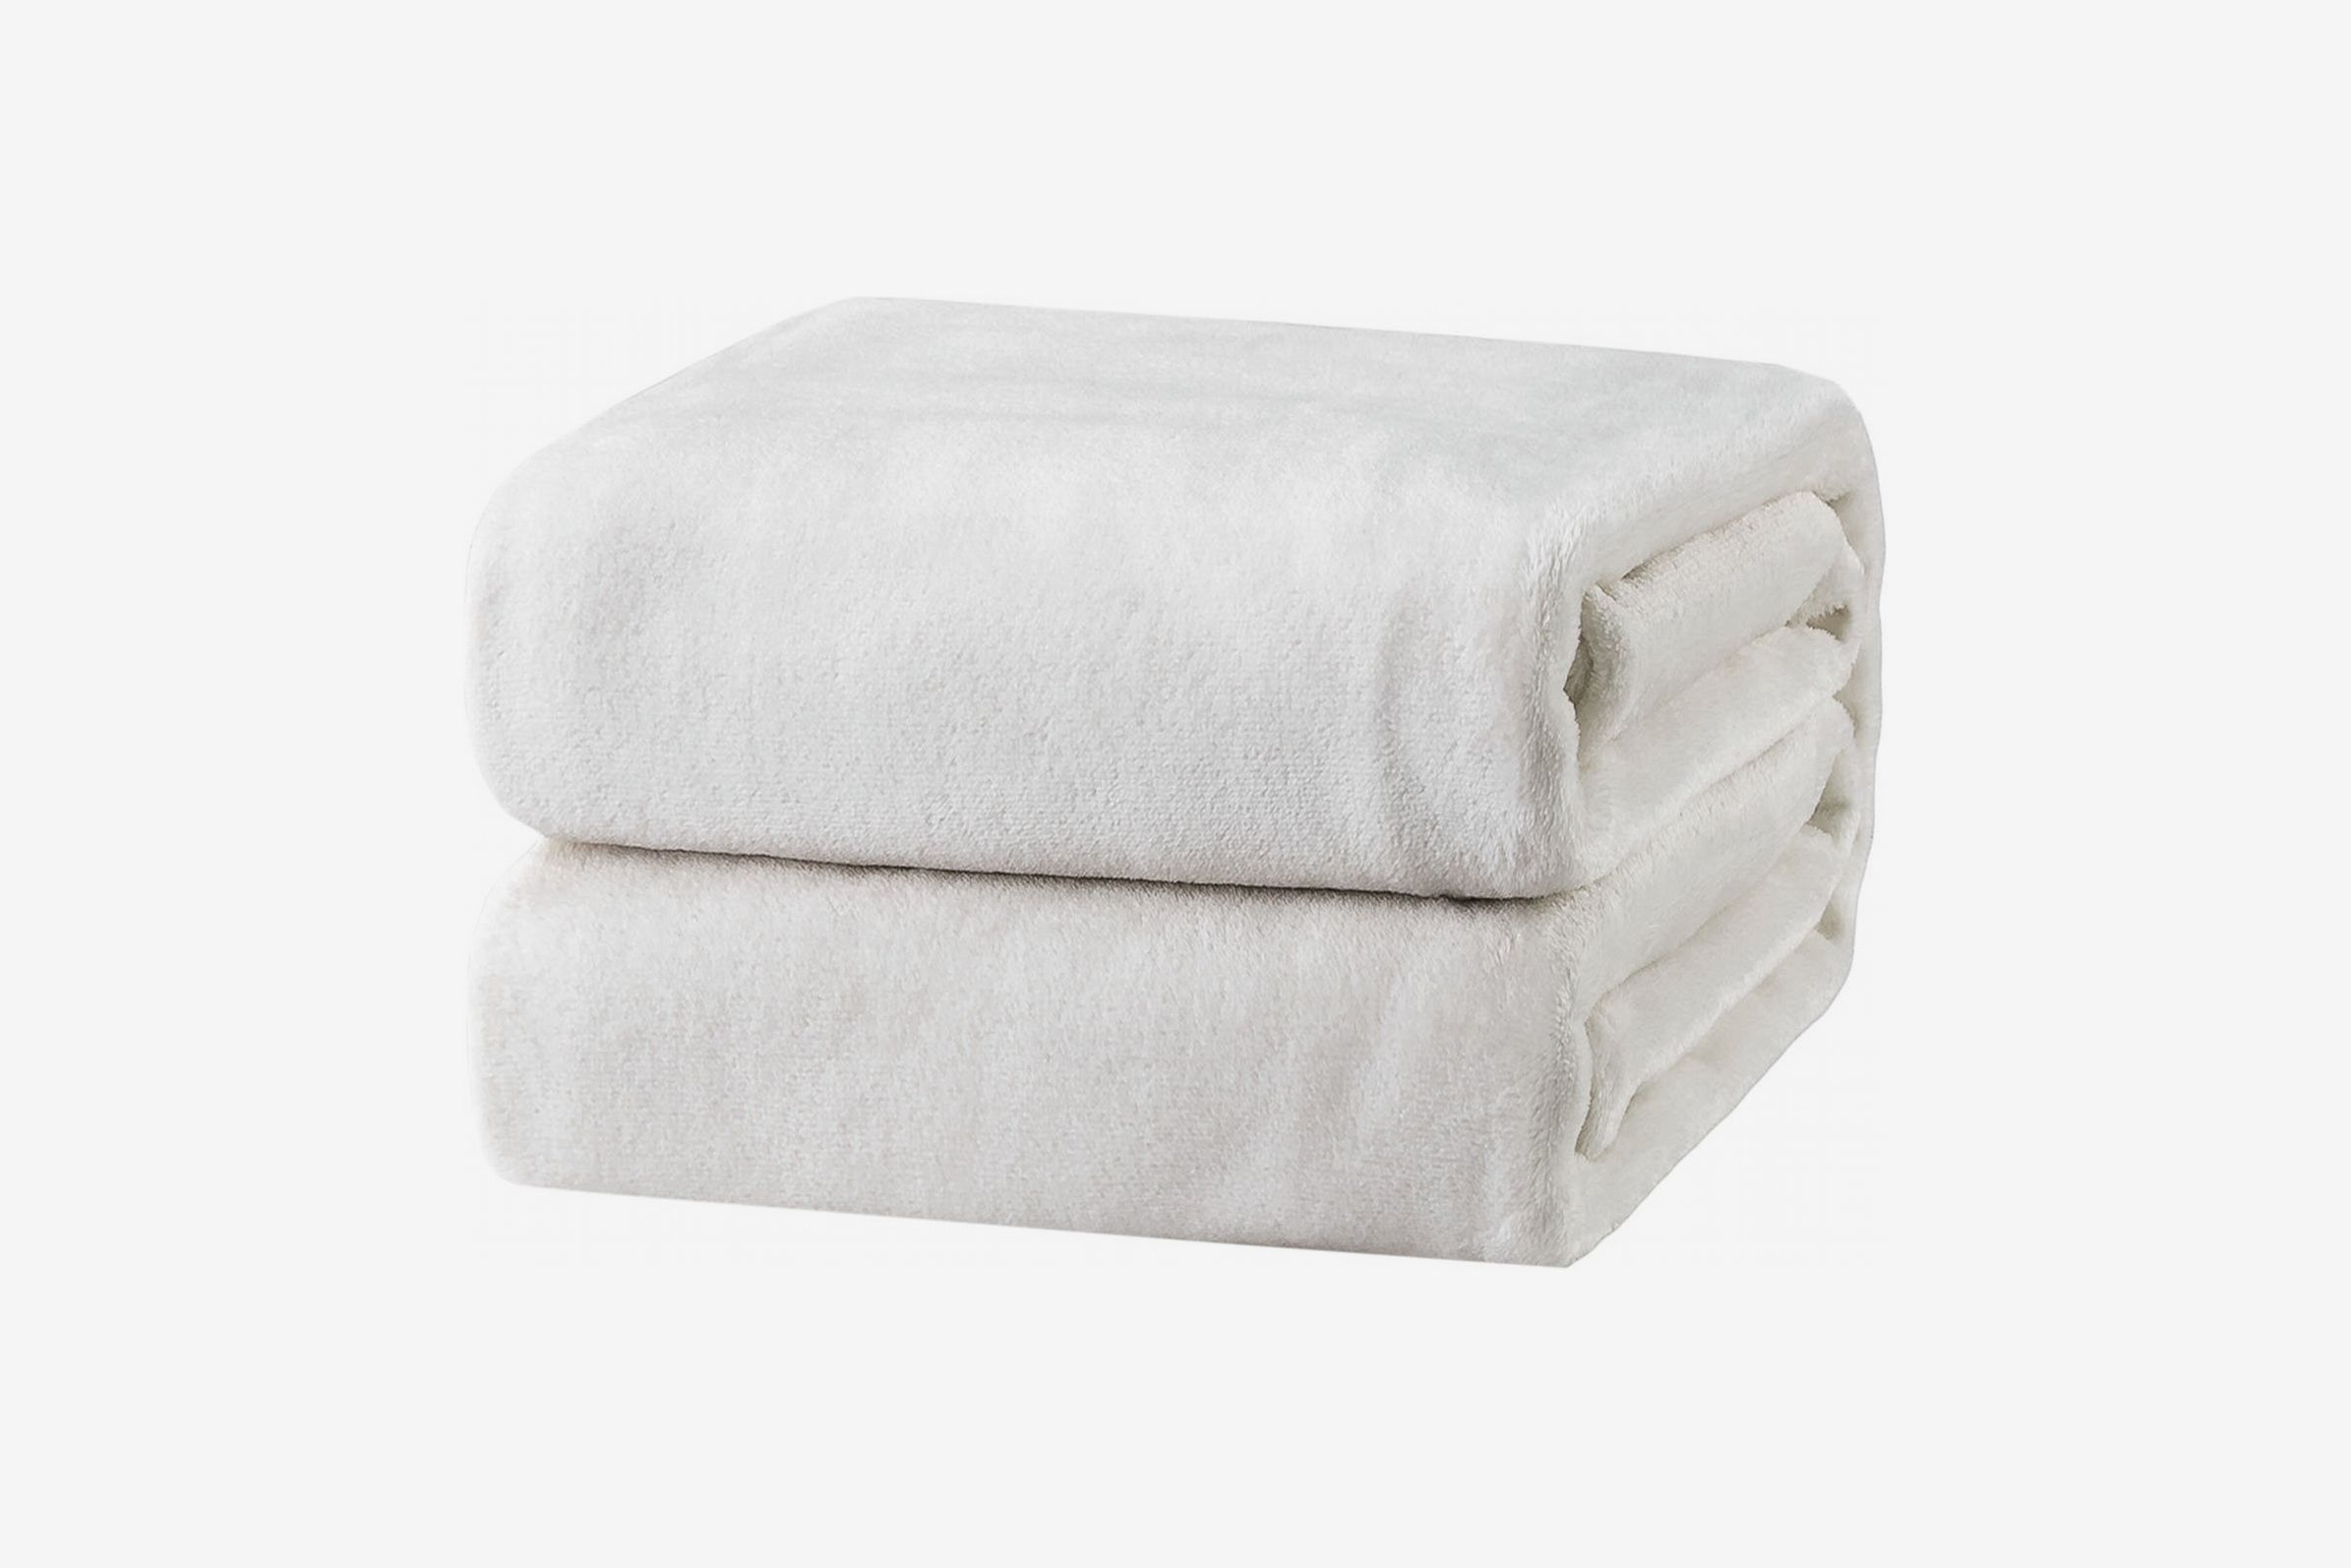 Fuzzy Blankets And Throws For All Seasons Details about   Veeyoo Fleece Blanket Queen Size So 